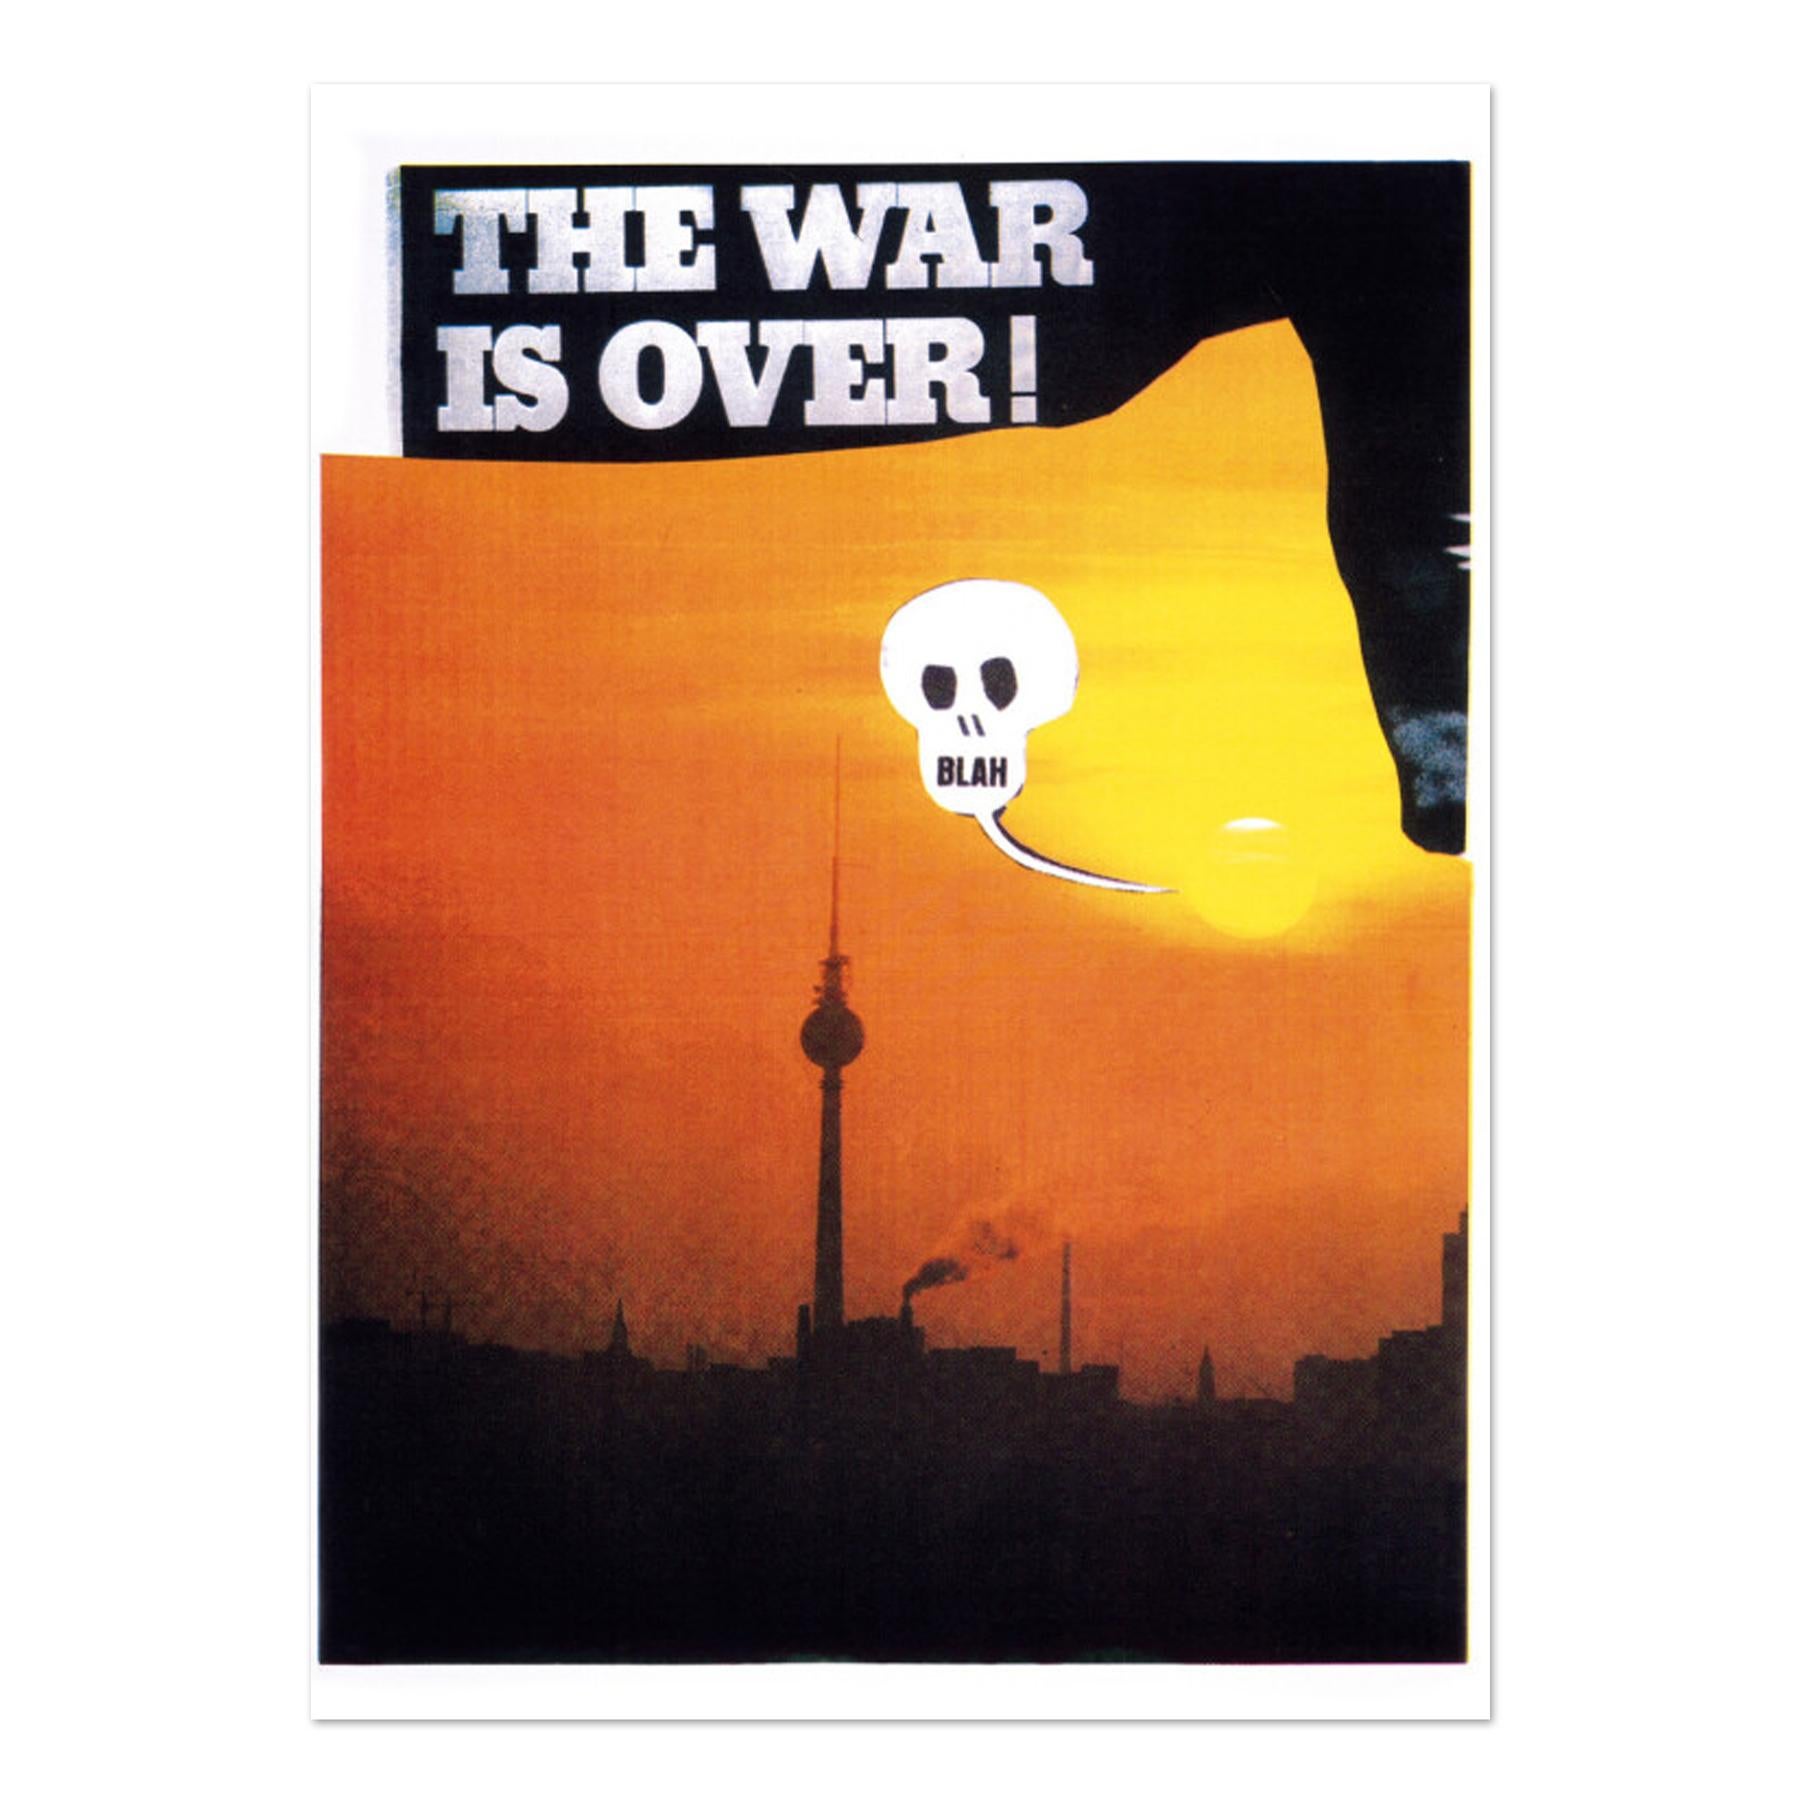 Daniel Richter (German, born 1962)
Untitled (The War is Over!), 2013
Medium: Screenprint on paper
Dimensions: 129.5 x 94 cm
Edition of 4: Hand-signed and numbered
Condition: Mint